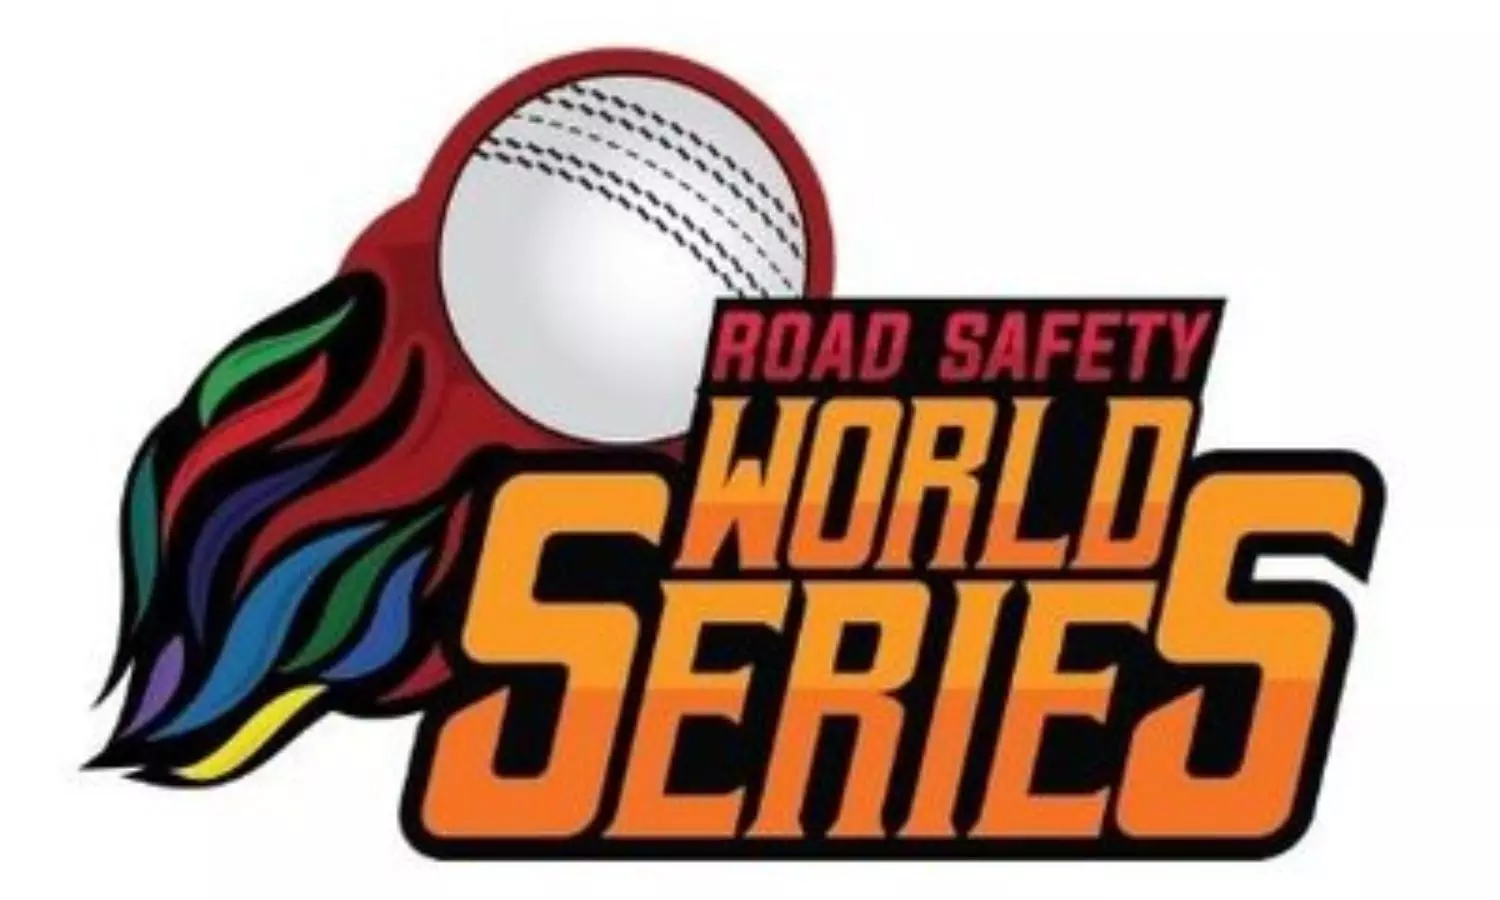 Road Safety World Series 2022 Points table, Standings, Net Run Rate, Matches played